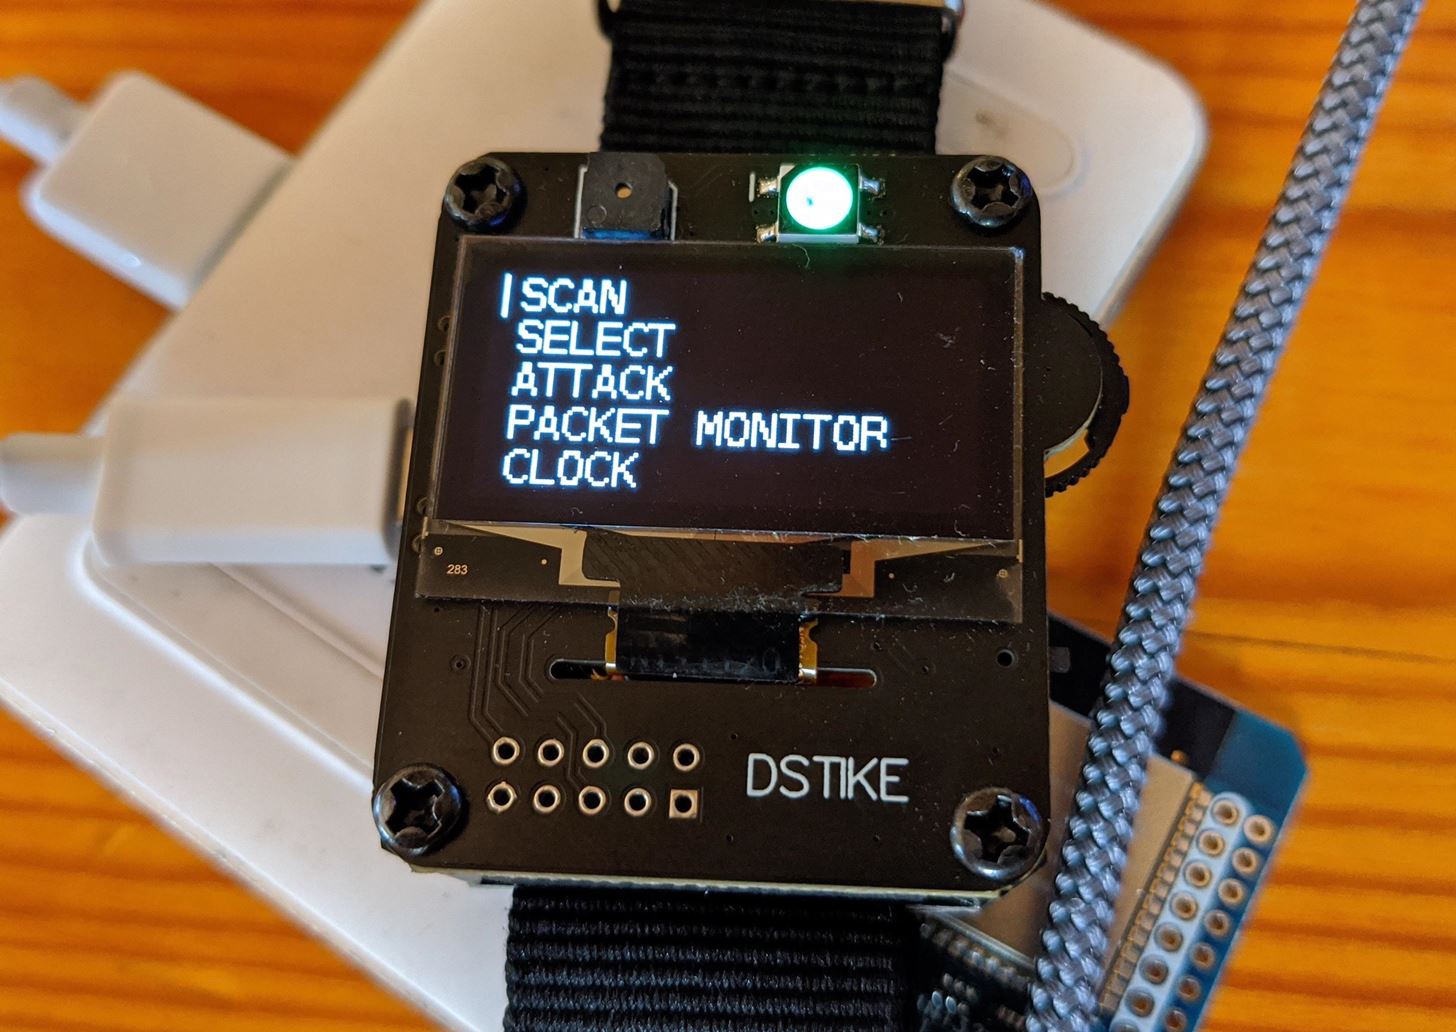 Hack Networks & Devices Right from Your Wrist with the Wi-Fi Deauther Watch